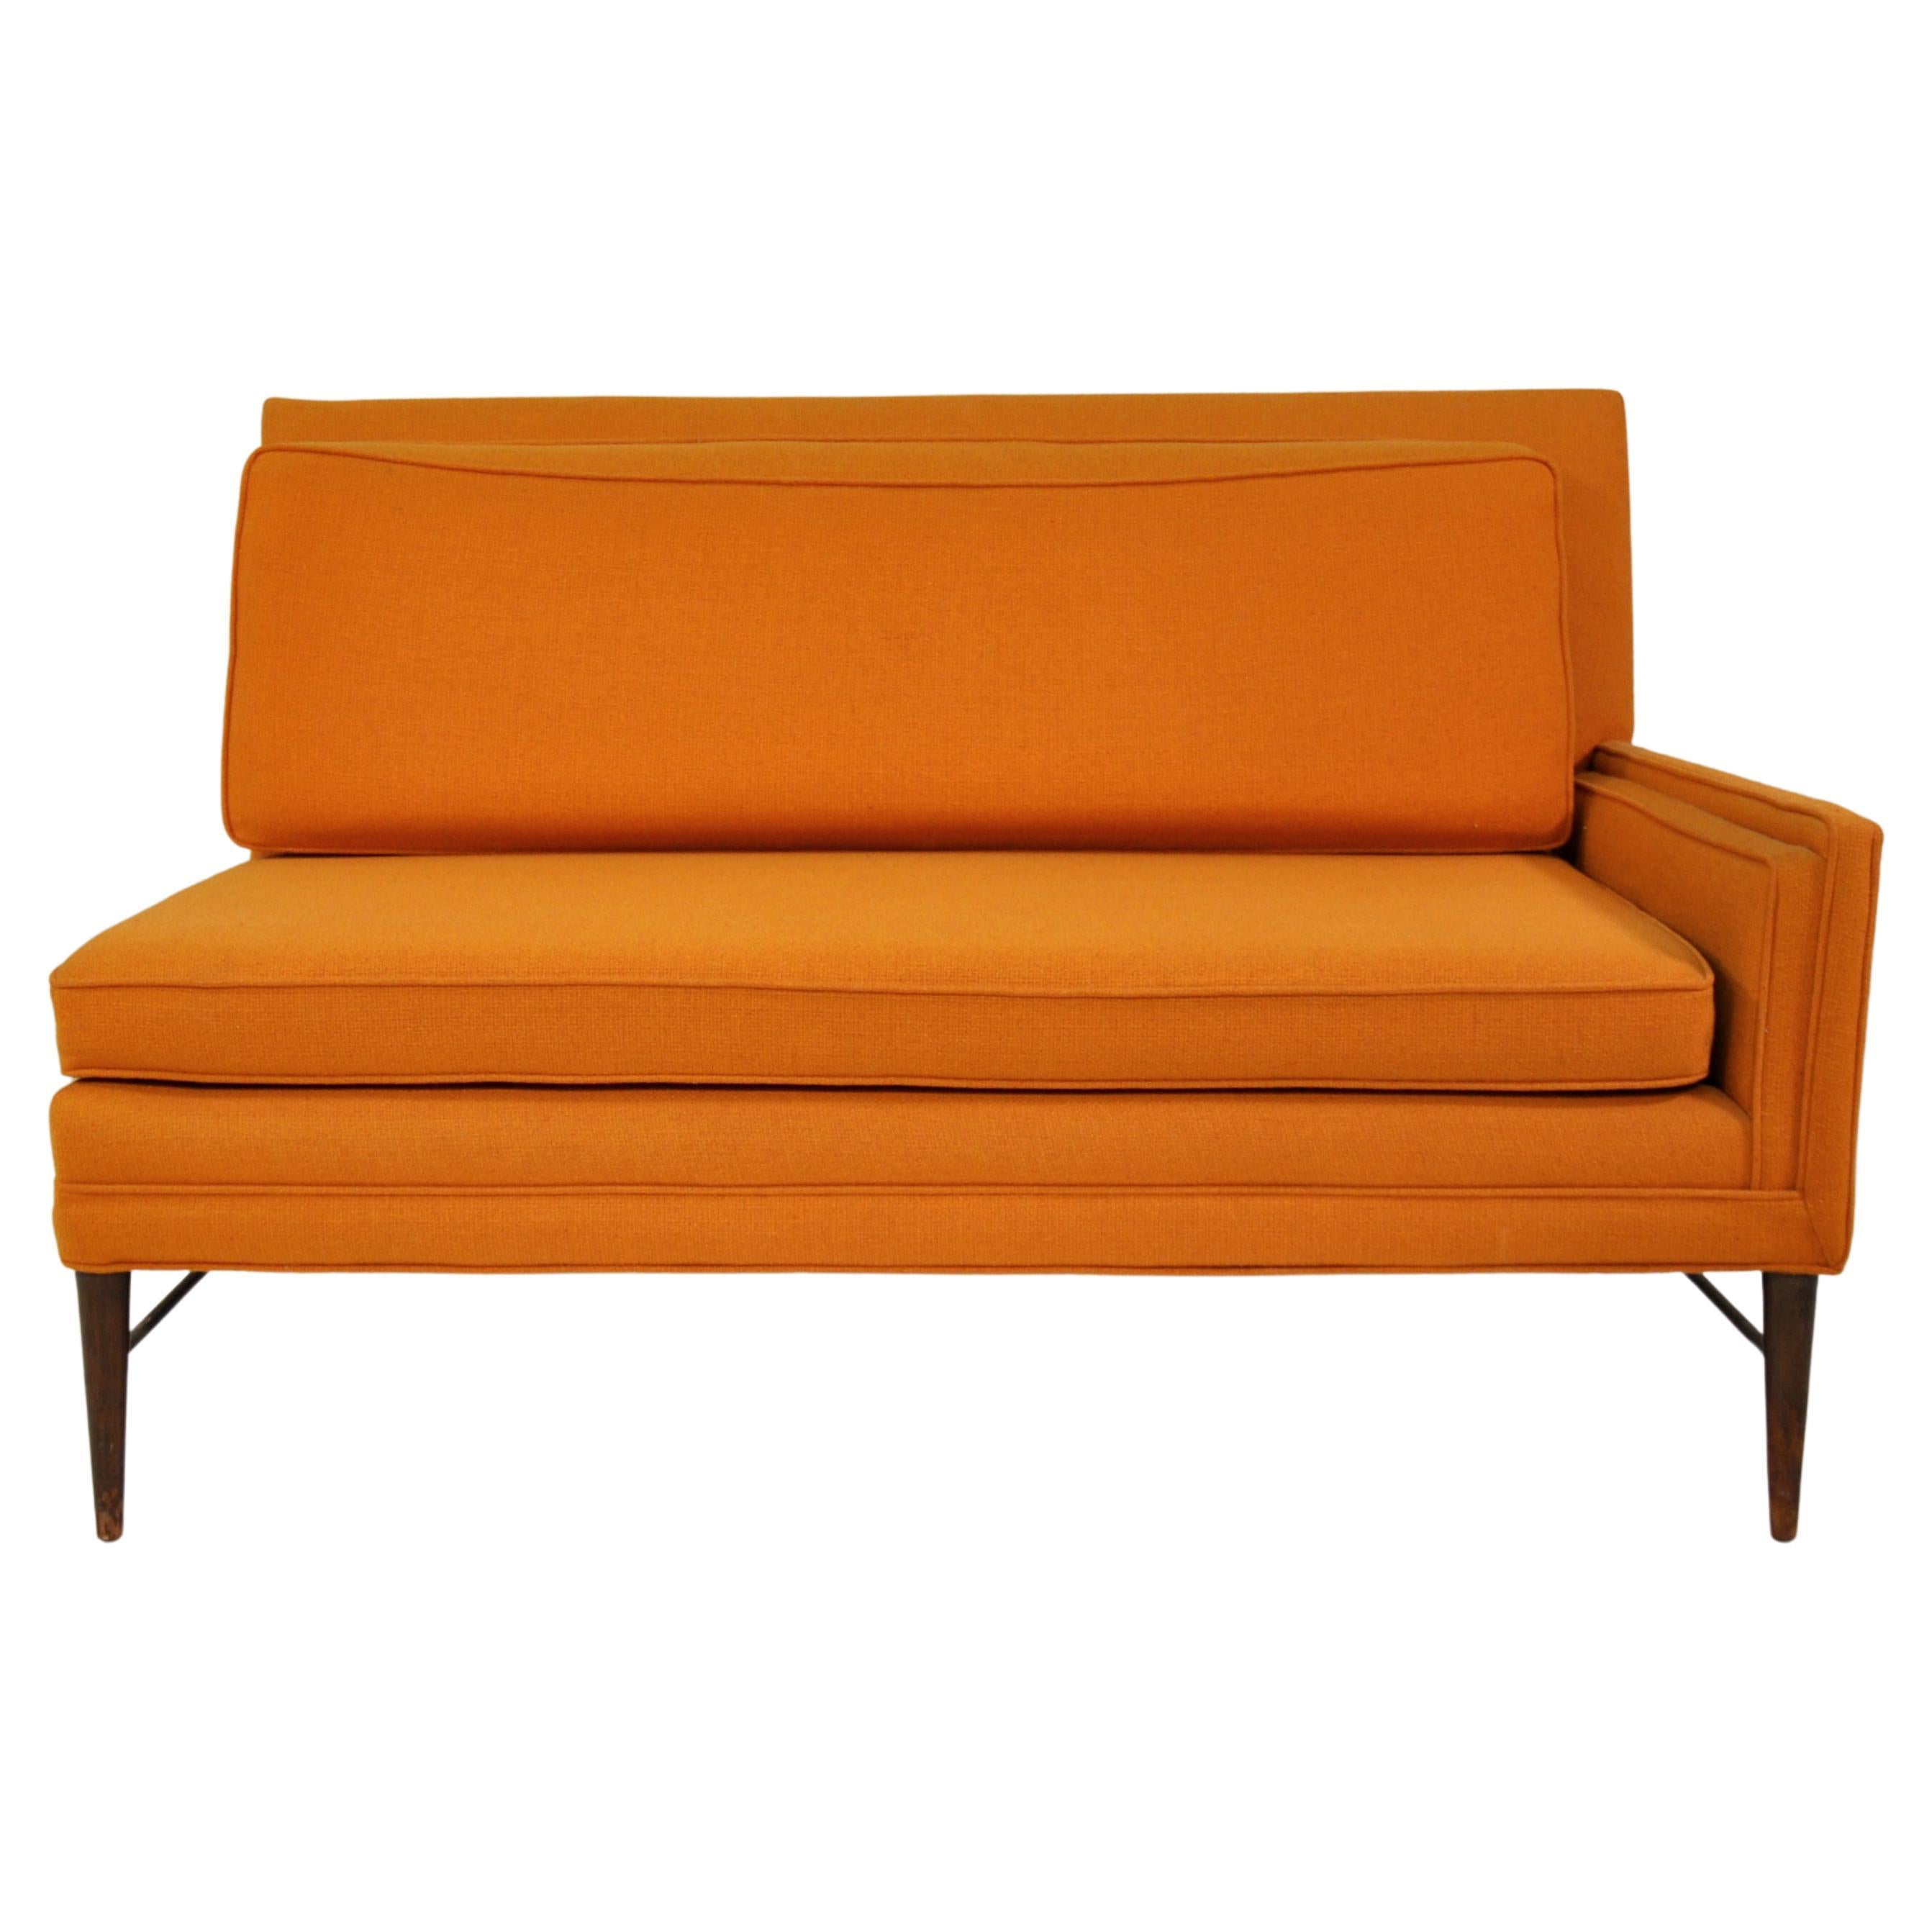 McCobb Walnut and Brass Burnt Orange Sectional Sofa In Good Condition For Sale In Miami, FL